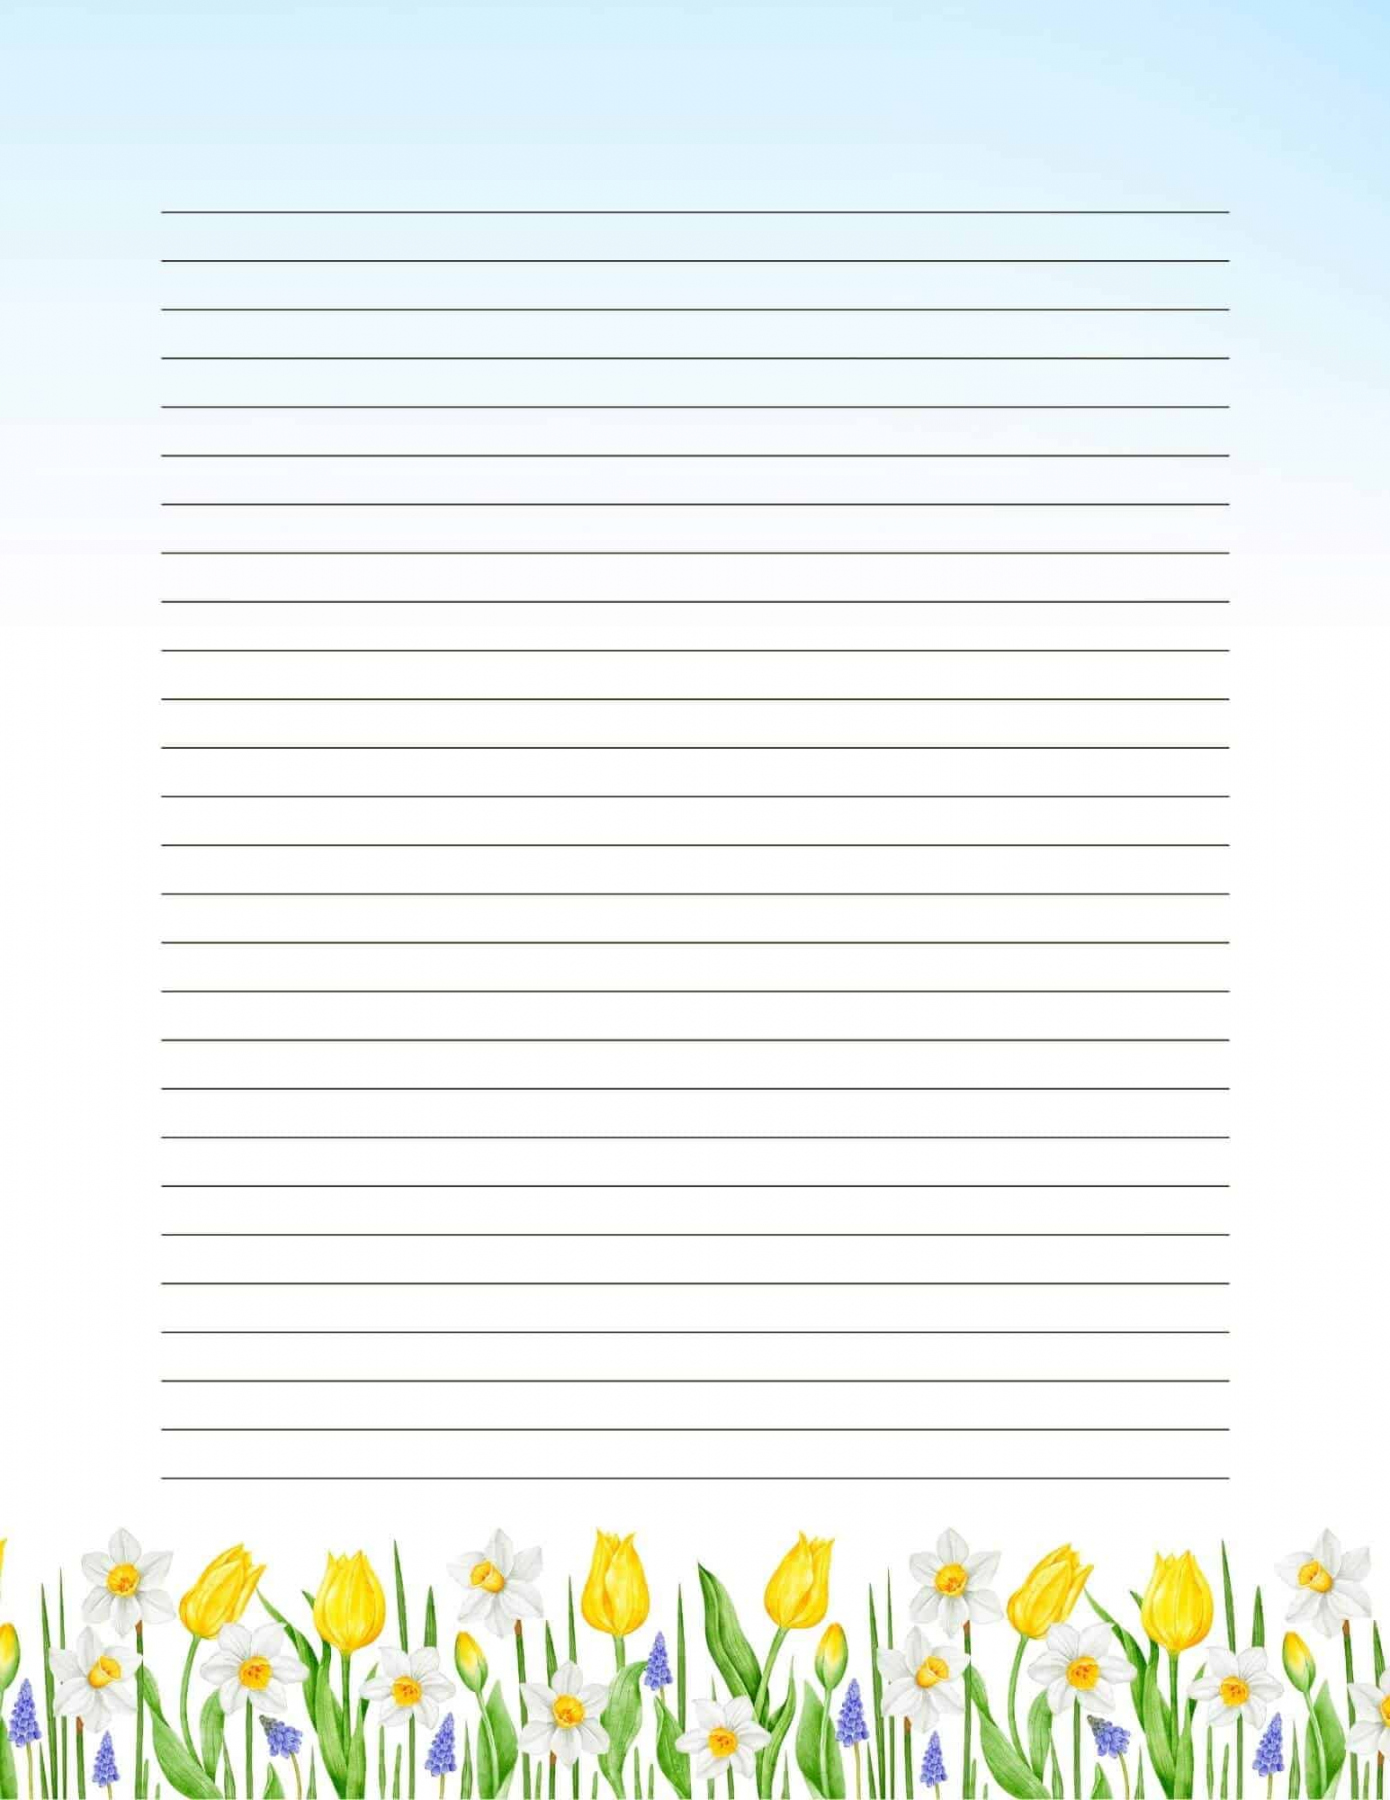 Free Printable Spring Stationery - Healthy and Lovin